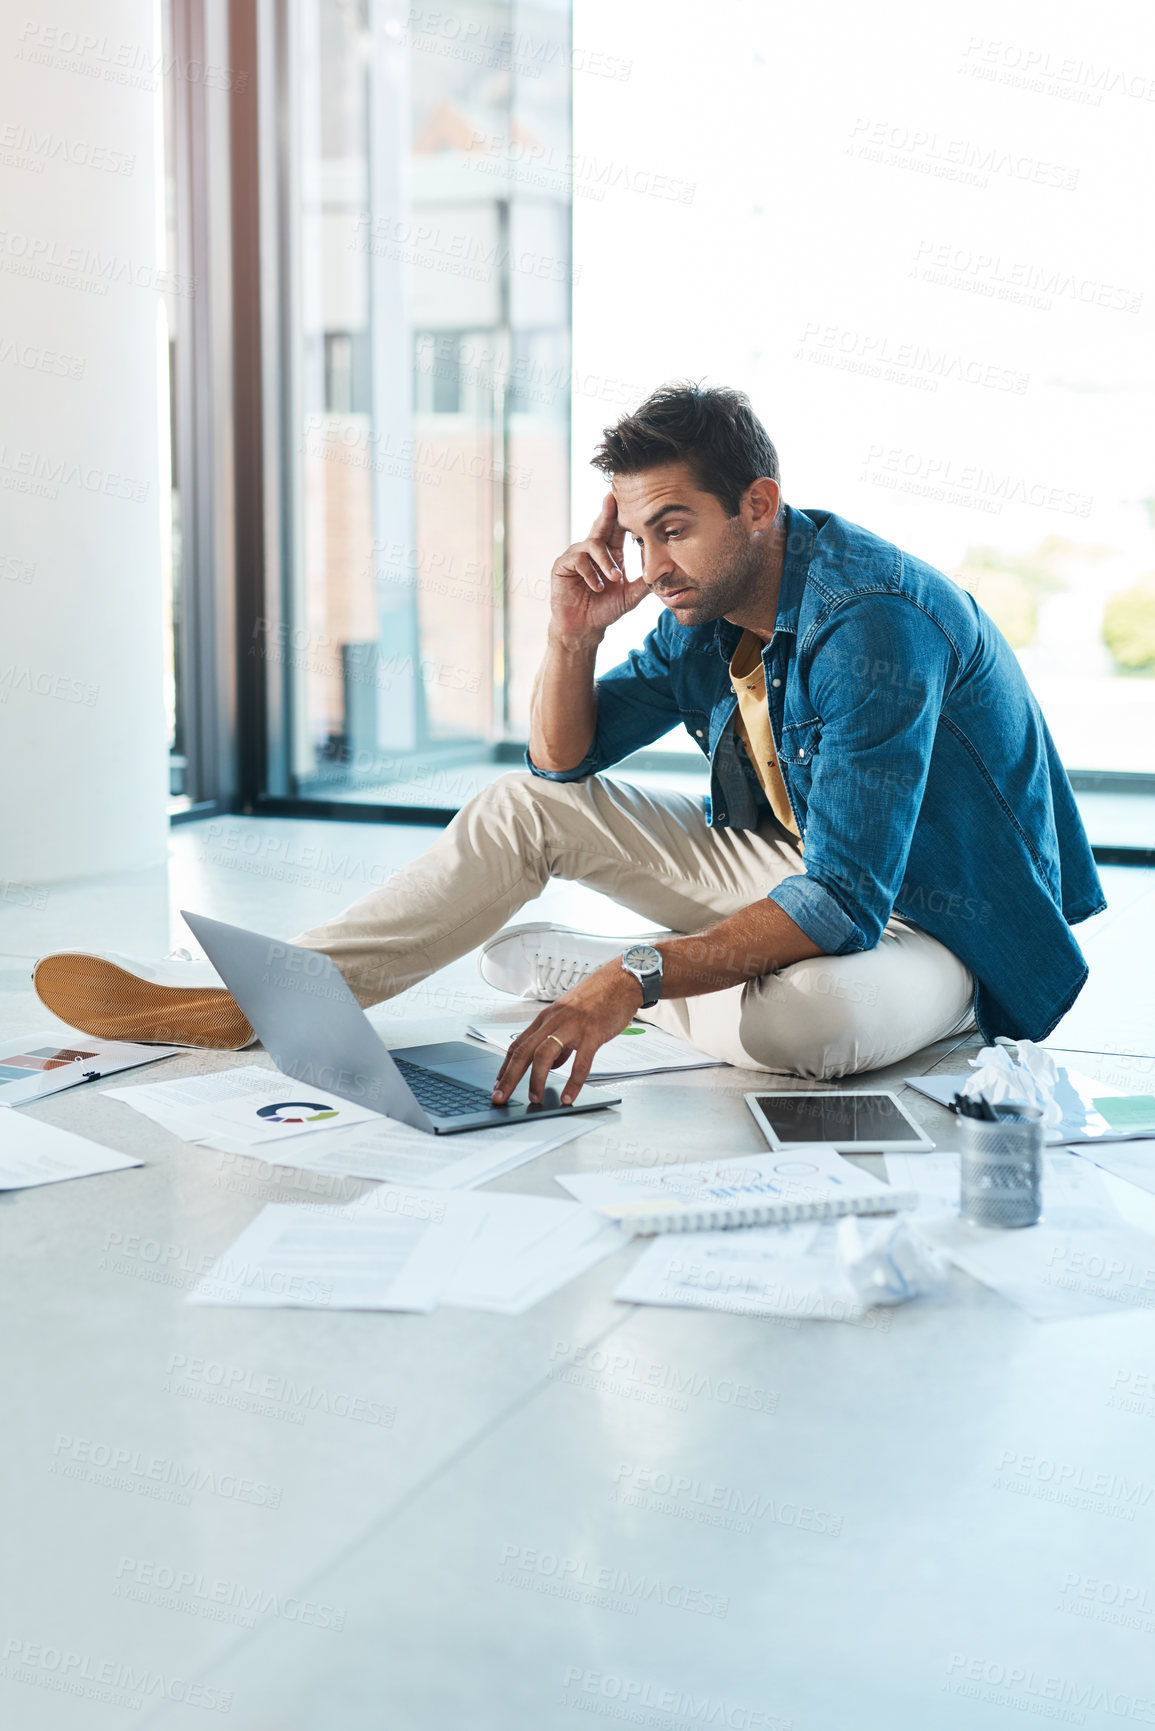 Buy stock photo Shot of a young businessman looking stressed out while working on a floor in an office